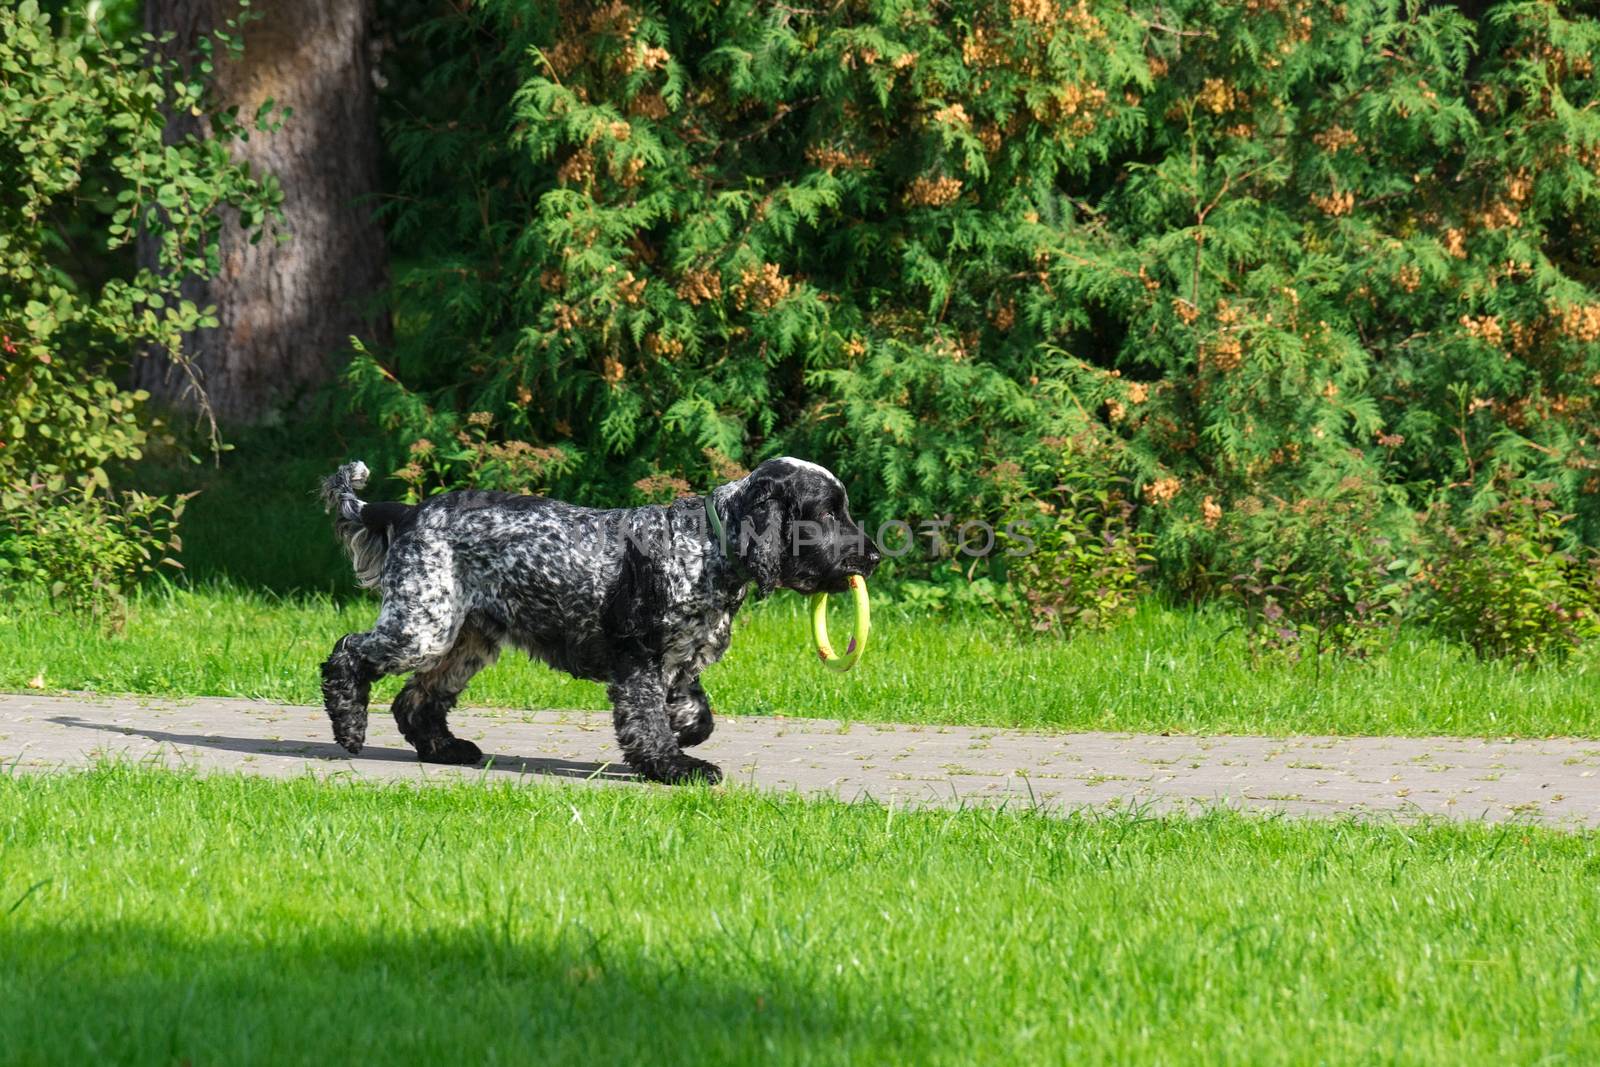 Dog breed spaniel on the grass in the park